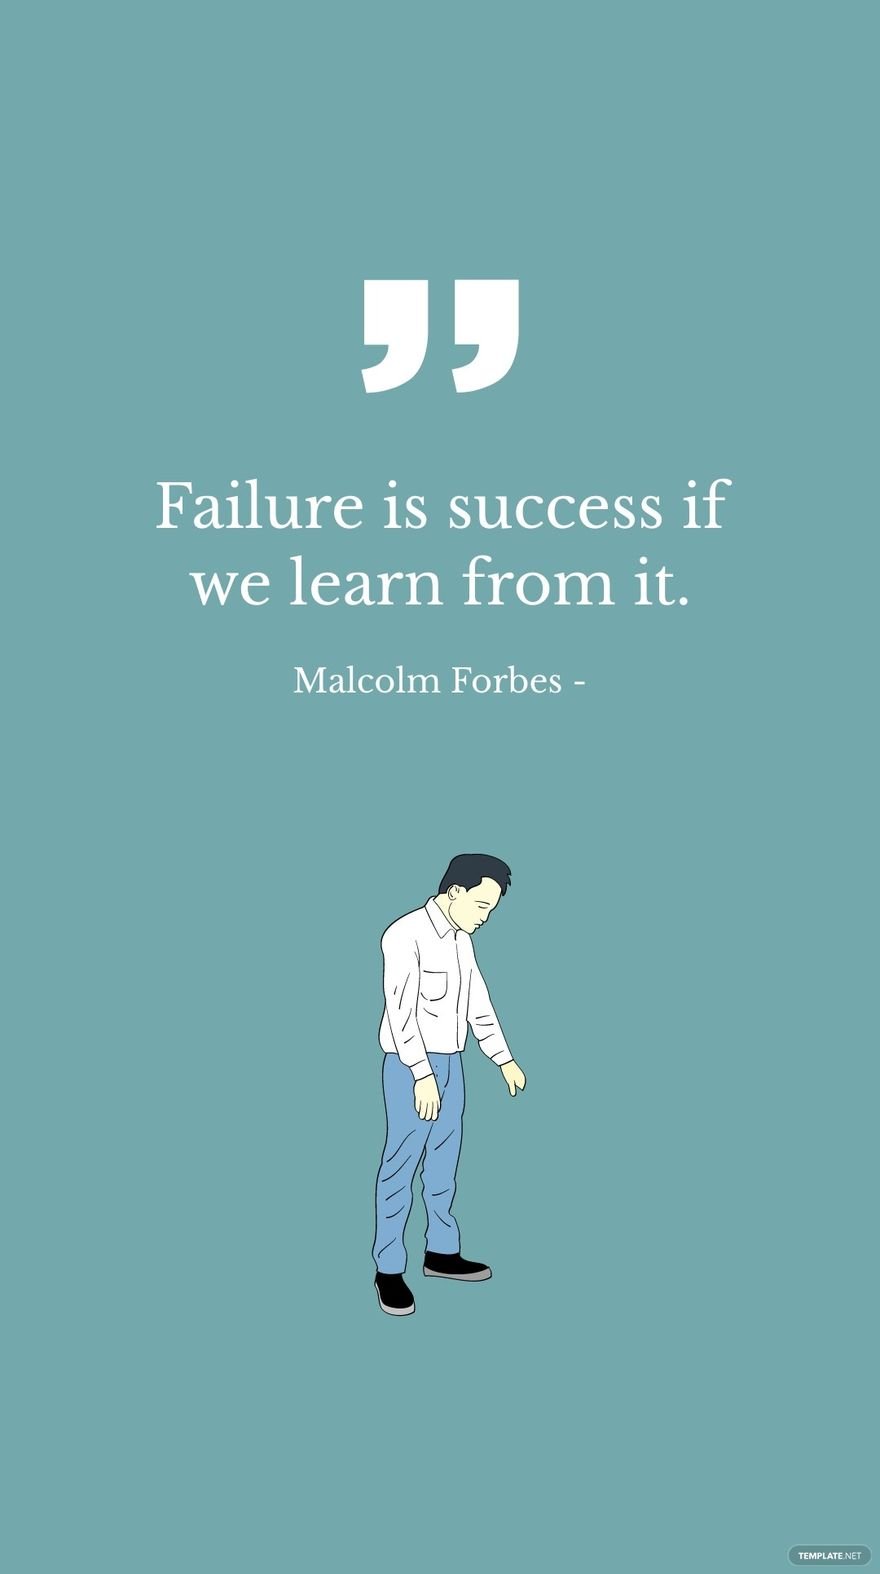 Malcolm Forbes - Failure is success if we learn from it. in JPG